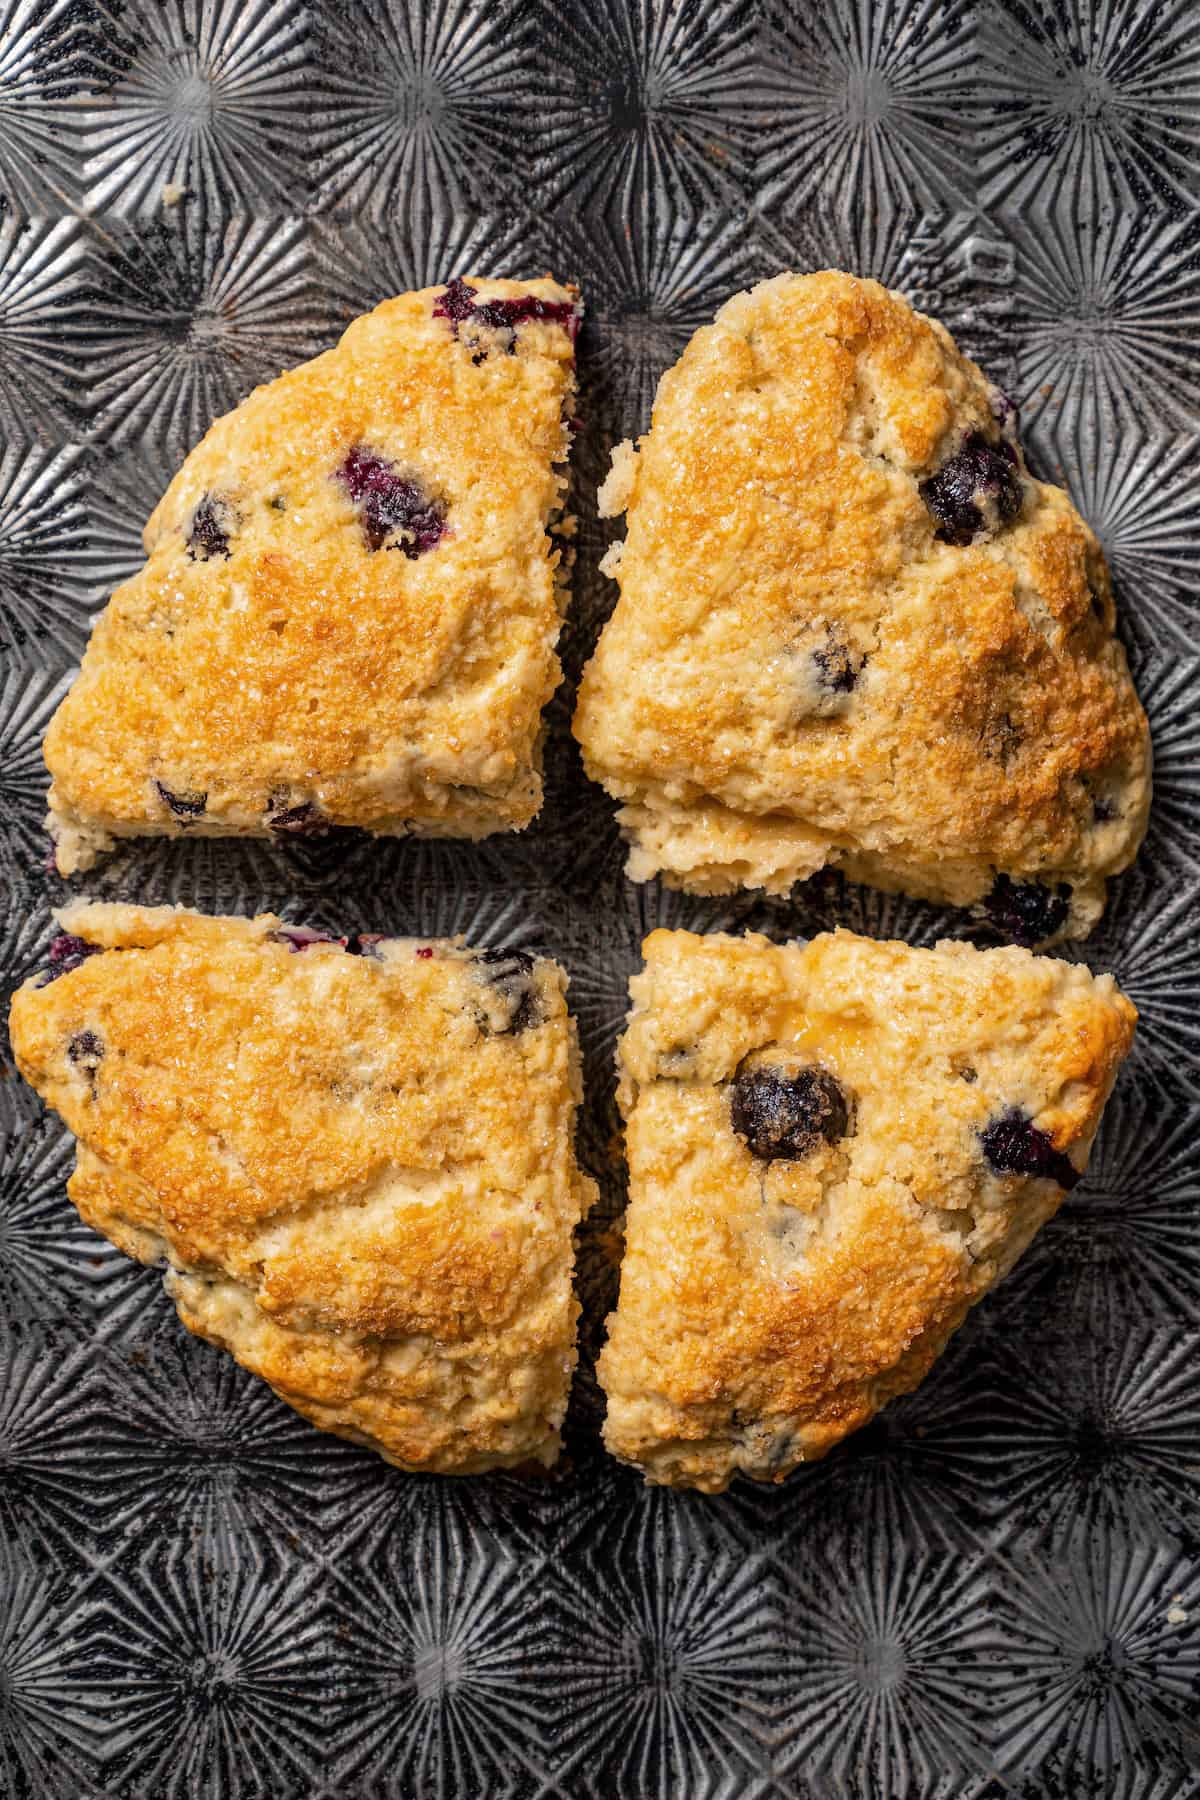 Overhead view of blueberry scones cut into quarters.